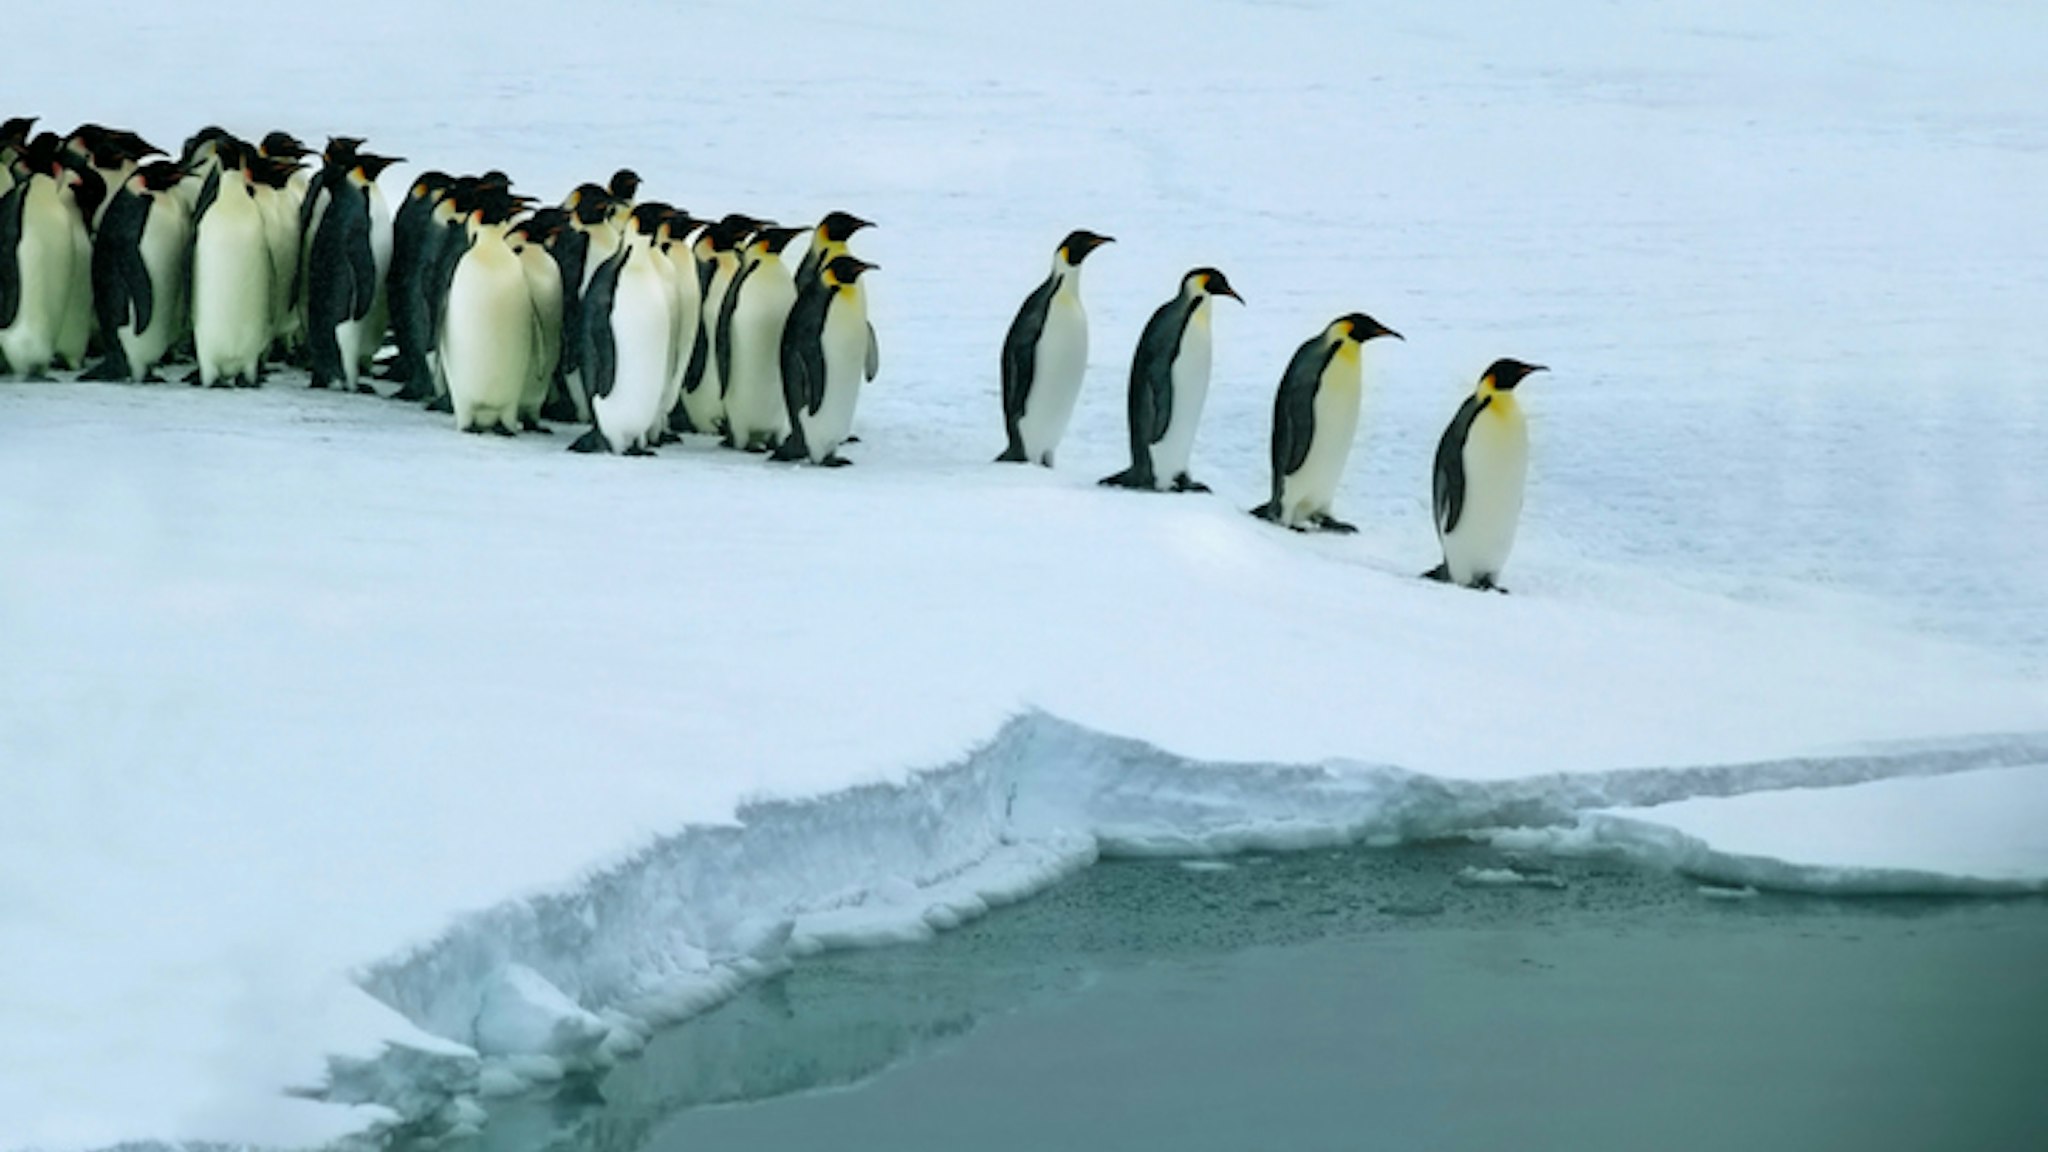 Emperor penguins, (Aptenodytes forsteri), form a queue before entering the water to reduce risk of being attacked by leopard seals as they enter the water, Weddel Sea, Antarctica.